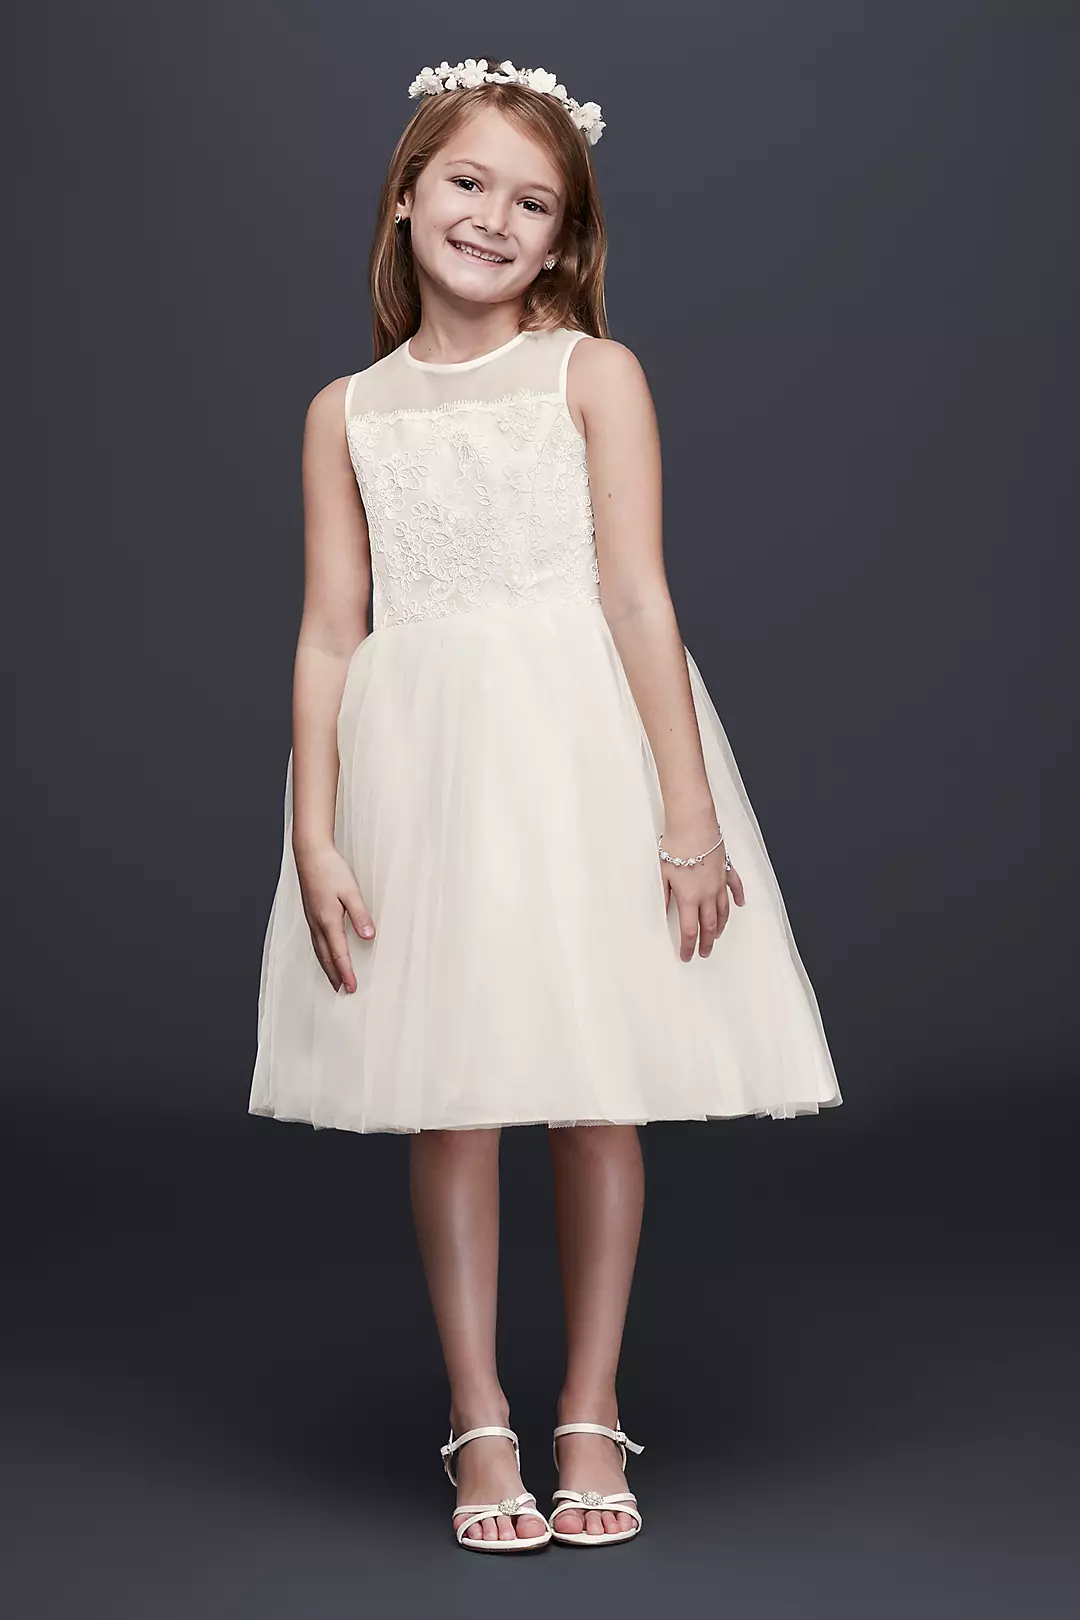 Corded Lace Flower Girl Dress with Tulle Skirt Image